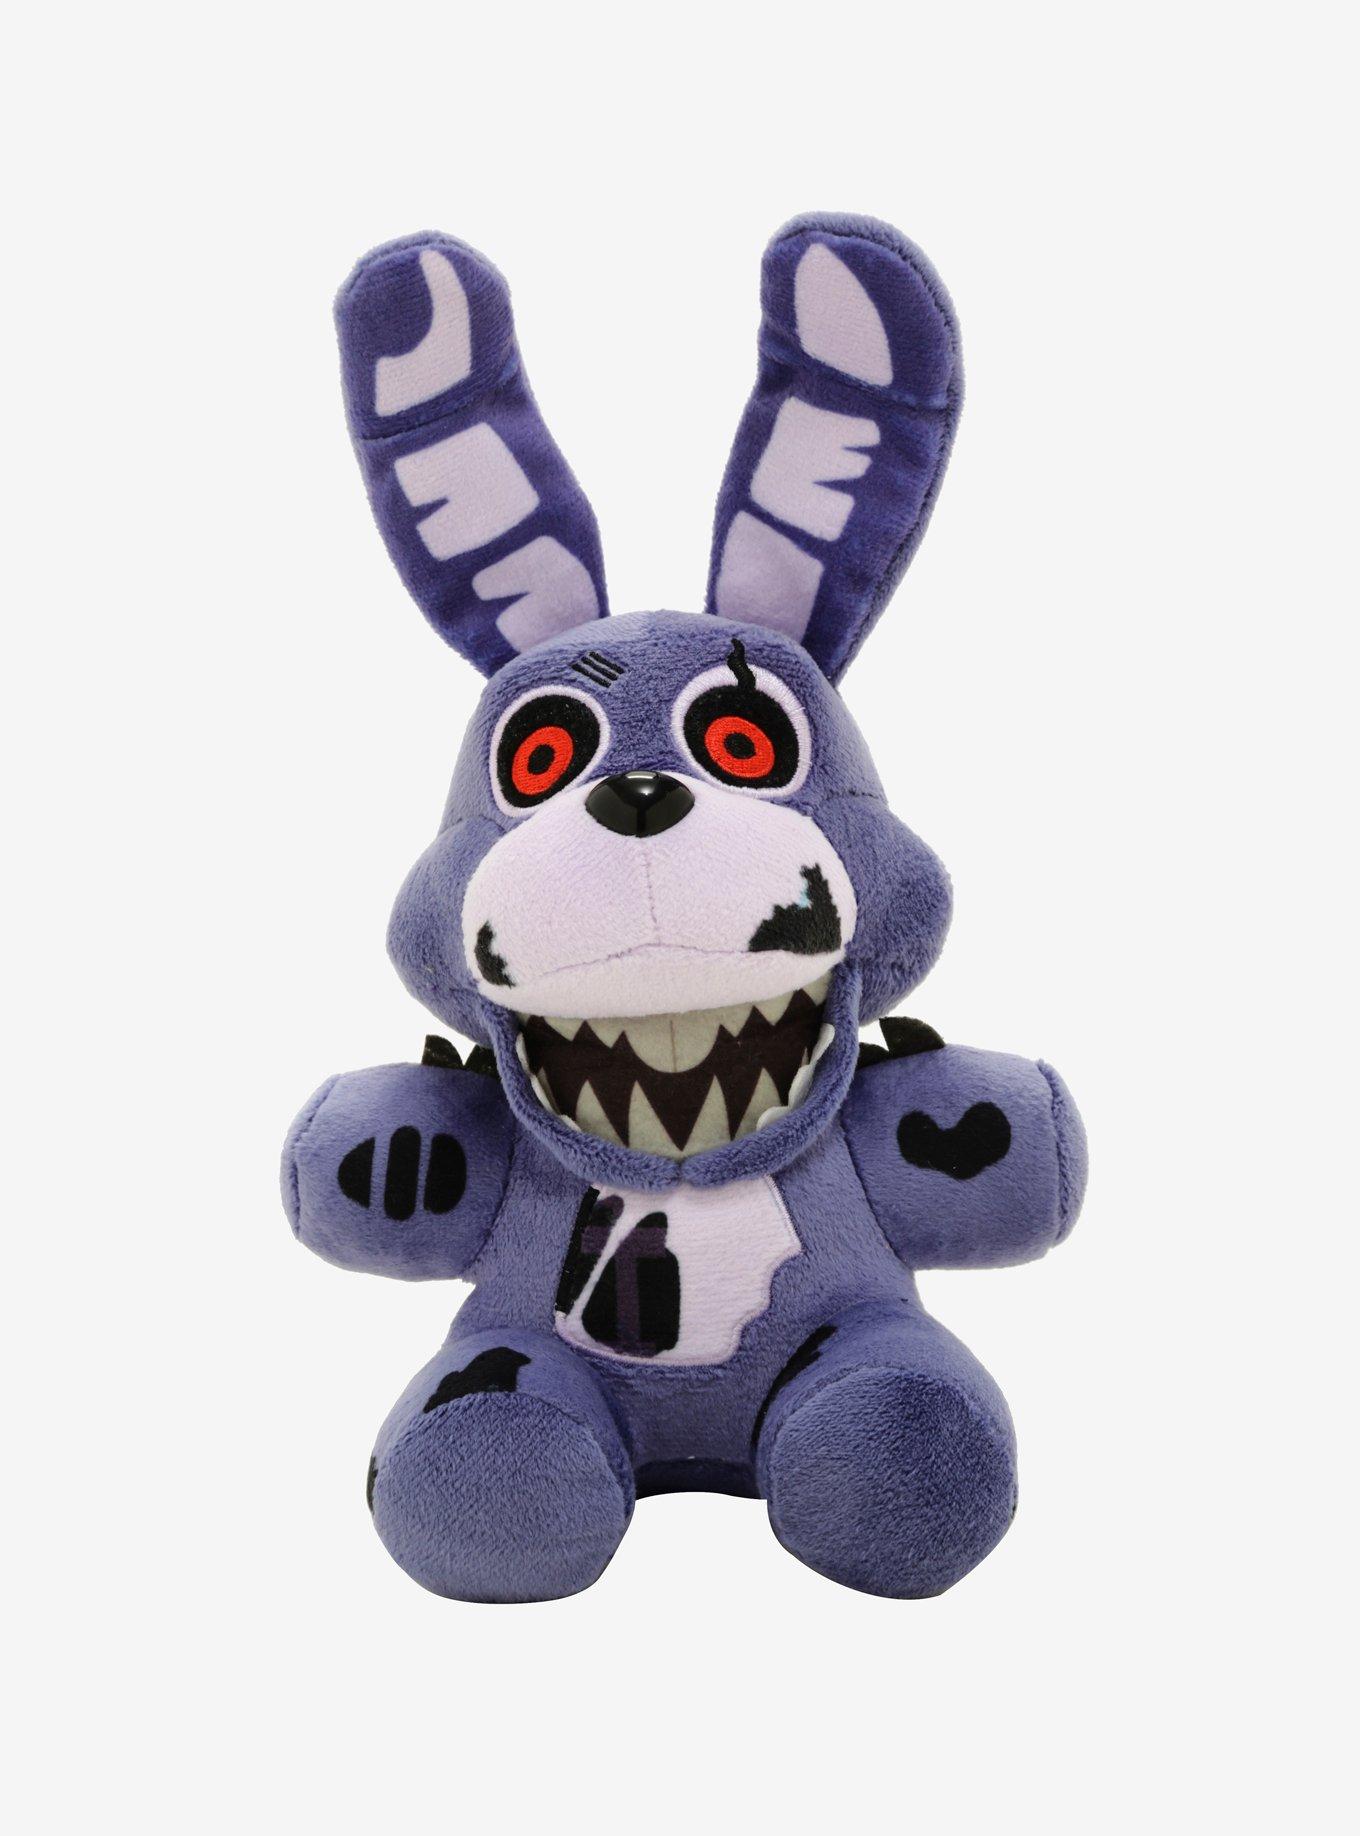  Funko Five Nights at Freddy's Toy Bonnie 6 (Hot Topic)  Exclusive FNAF Plush Doll : Toys & Games